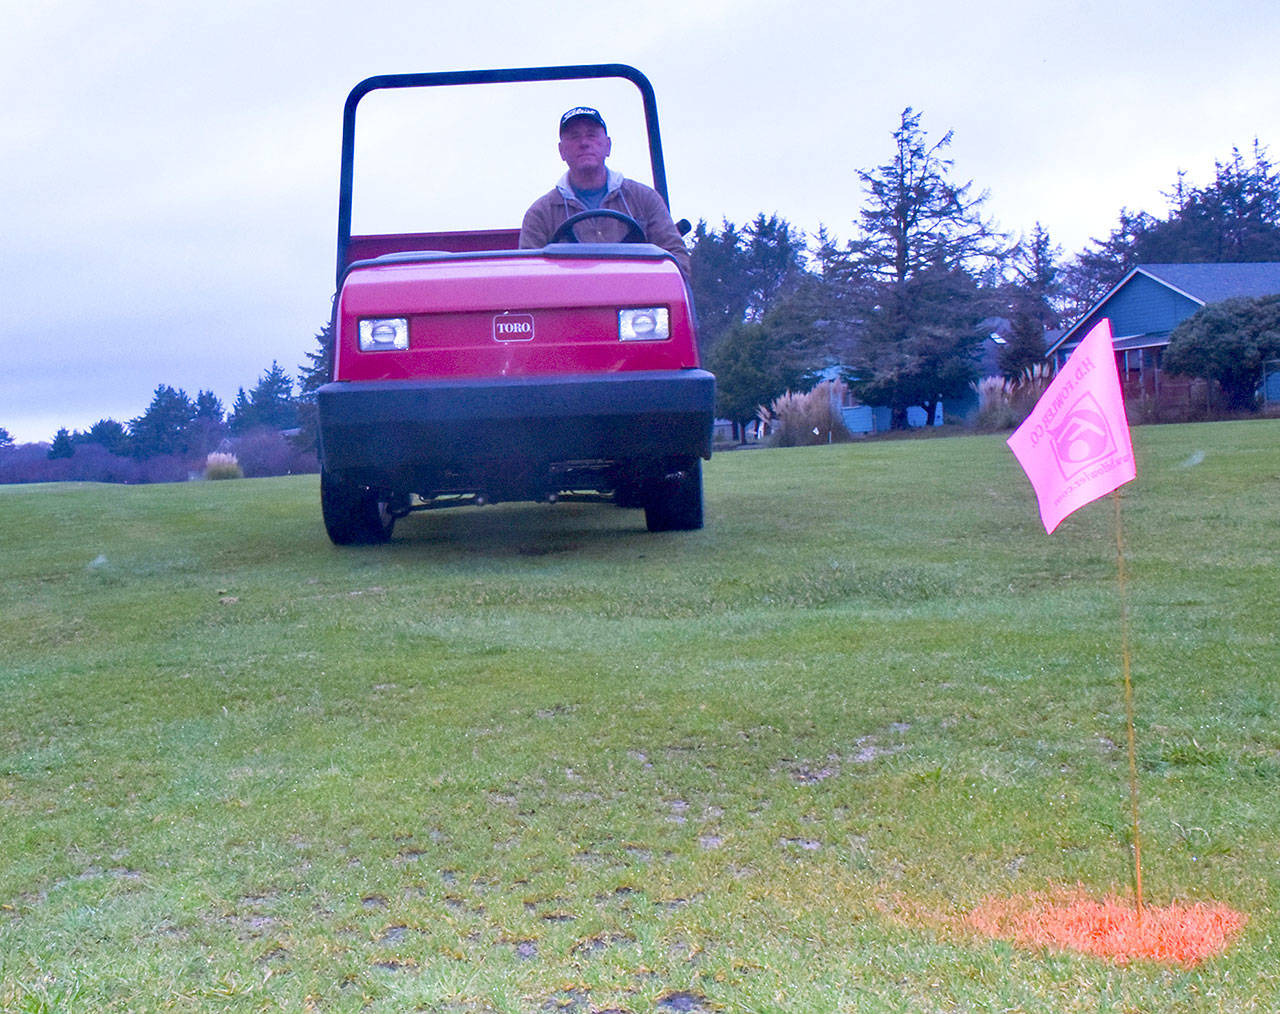 Ocean Shores Golf Course operator Curt Zander shows where a flag marks the intended location of a new sprinkler head, one of 120 he will install as part of an irrigation repair project just begun on holes 10, 11, 12 and 18. (Photo by Scott D. Johnston)